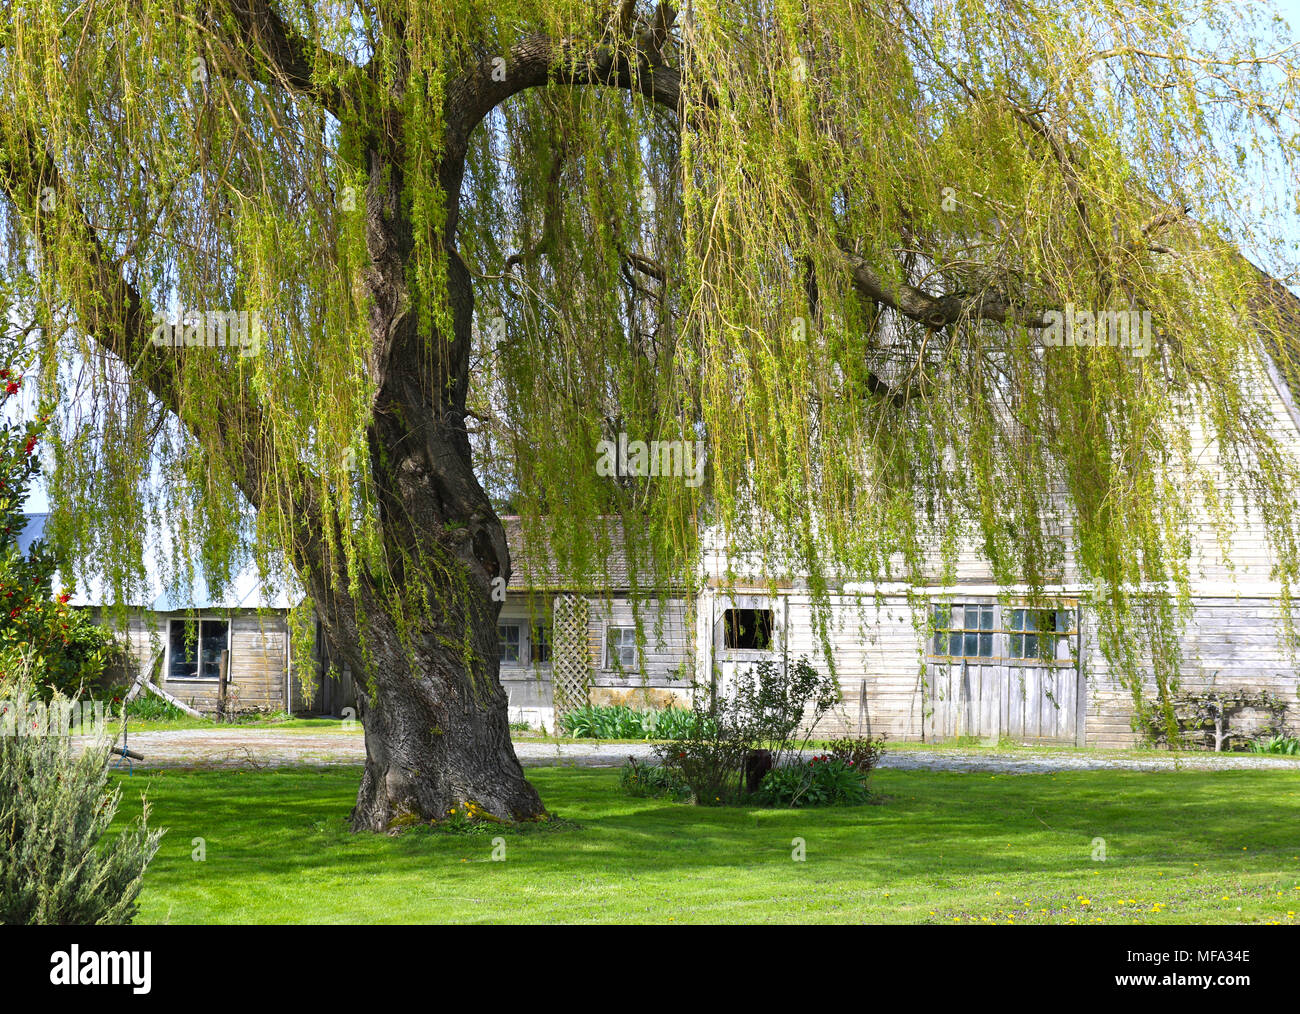 Weeping willow tree in front of a rustic white barn in the Skagit Valley of the Pacific Nortwest city of Mount Vernon, Washington. Stock Photo